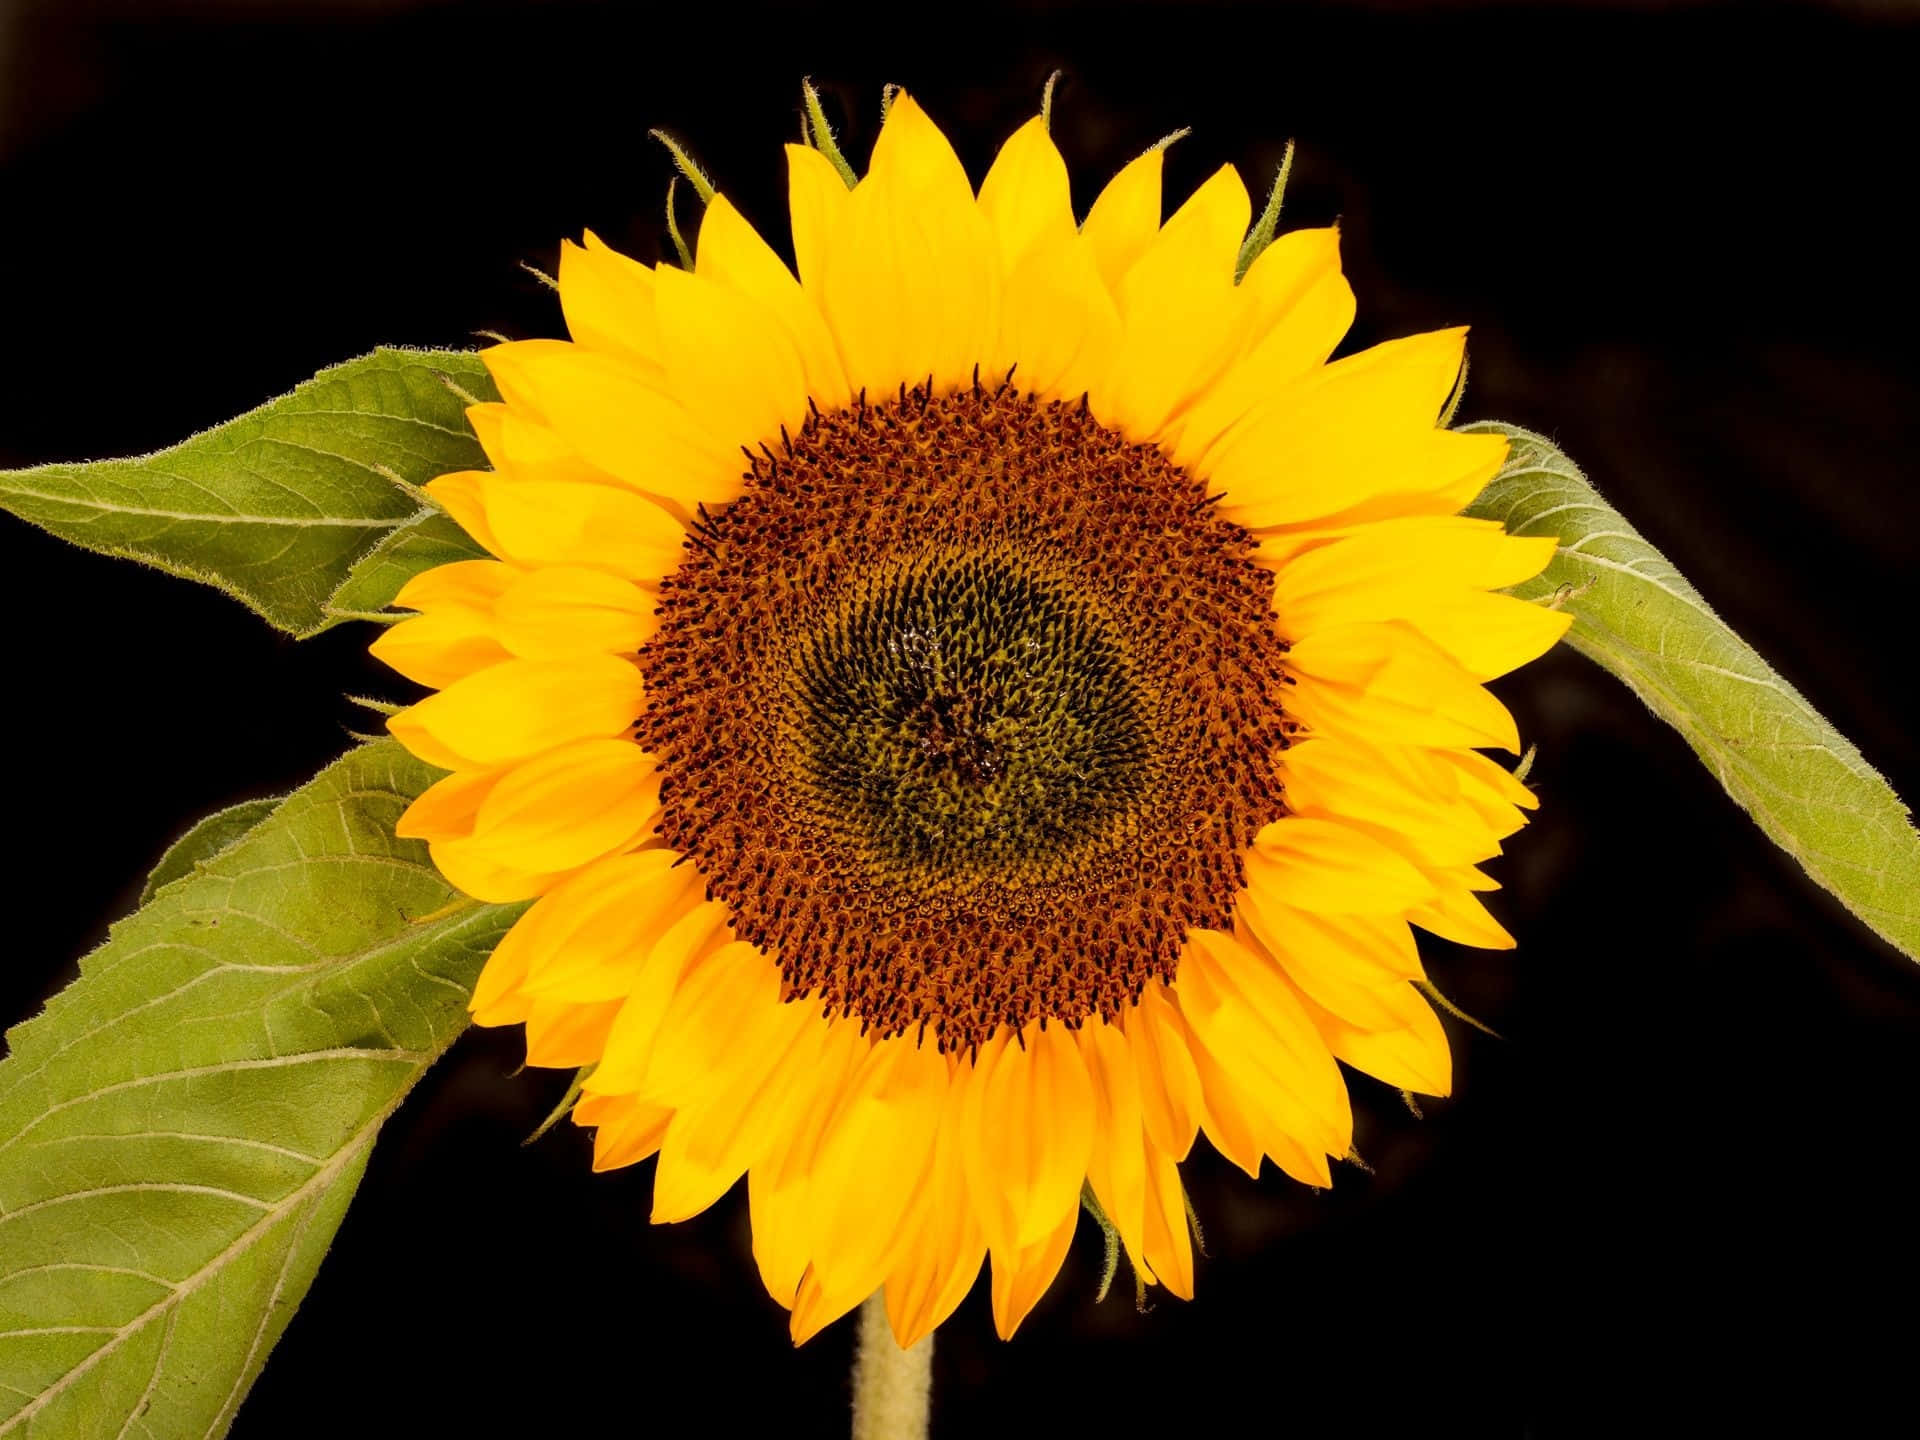 A Sunflower With A Black Background Wallpaper